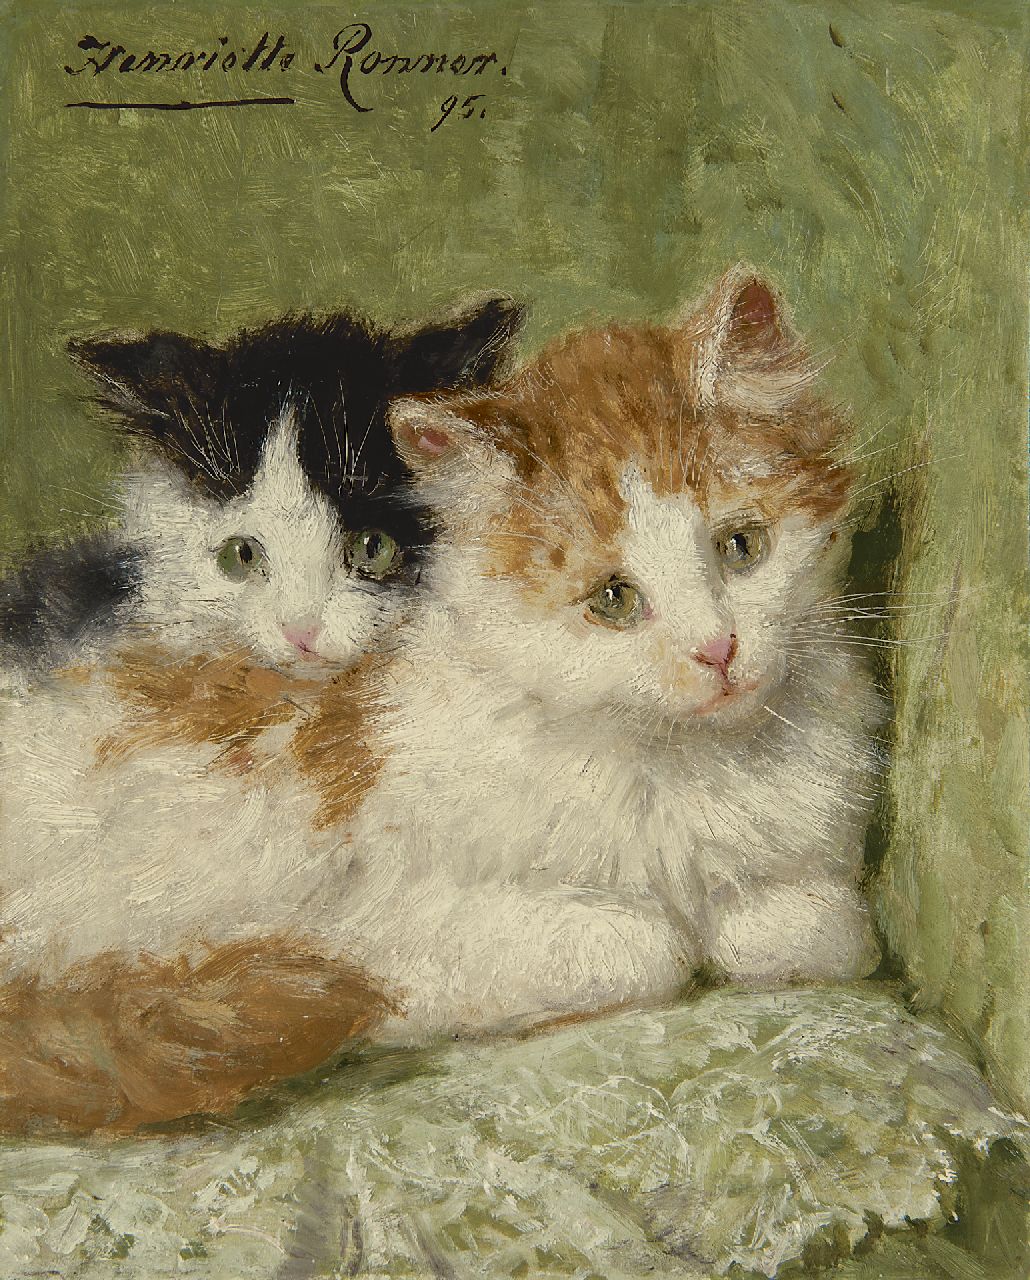 Ronner-Knip H.  | Henriette Ronner-Knip, Two kittens sitting on a cushion, oil on panel 20.9 x 16.7 cm, signed u.l. and dated '95